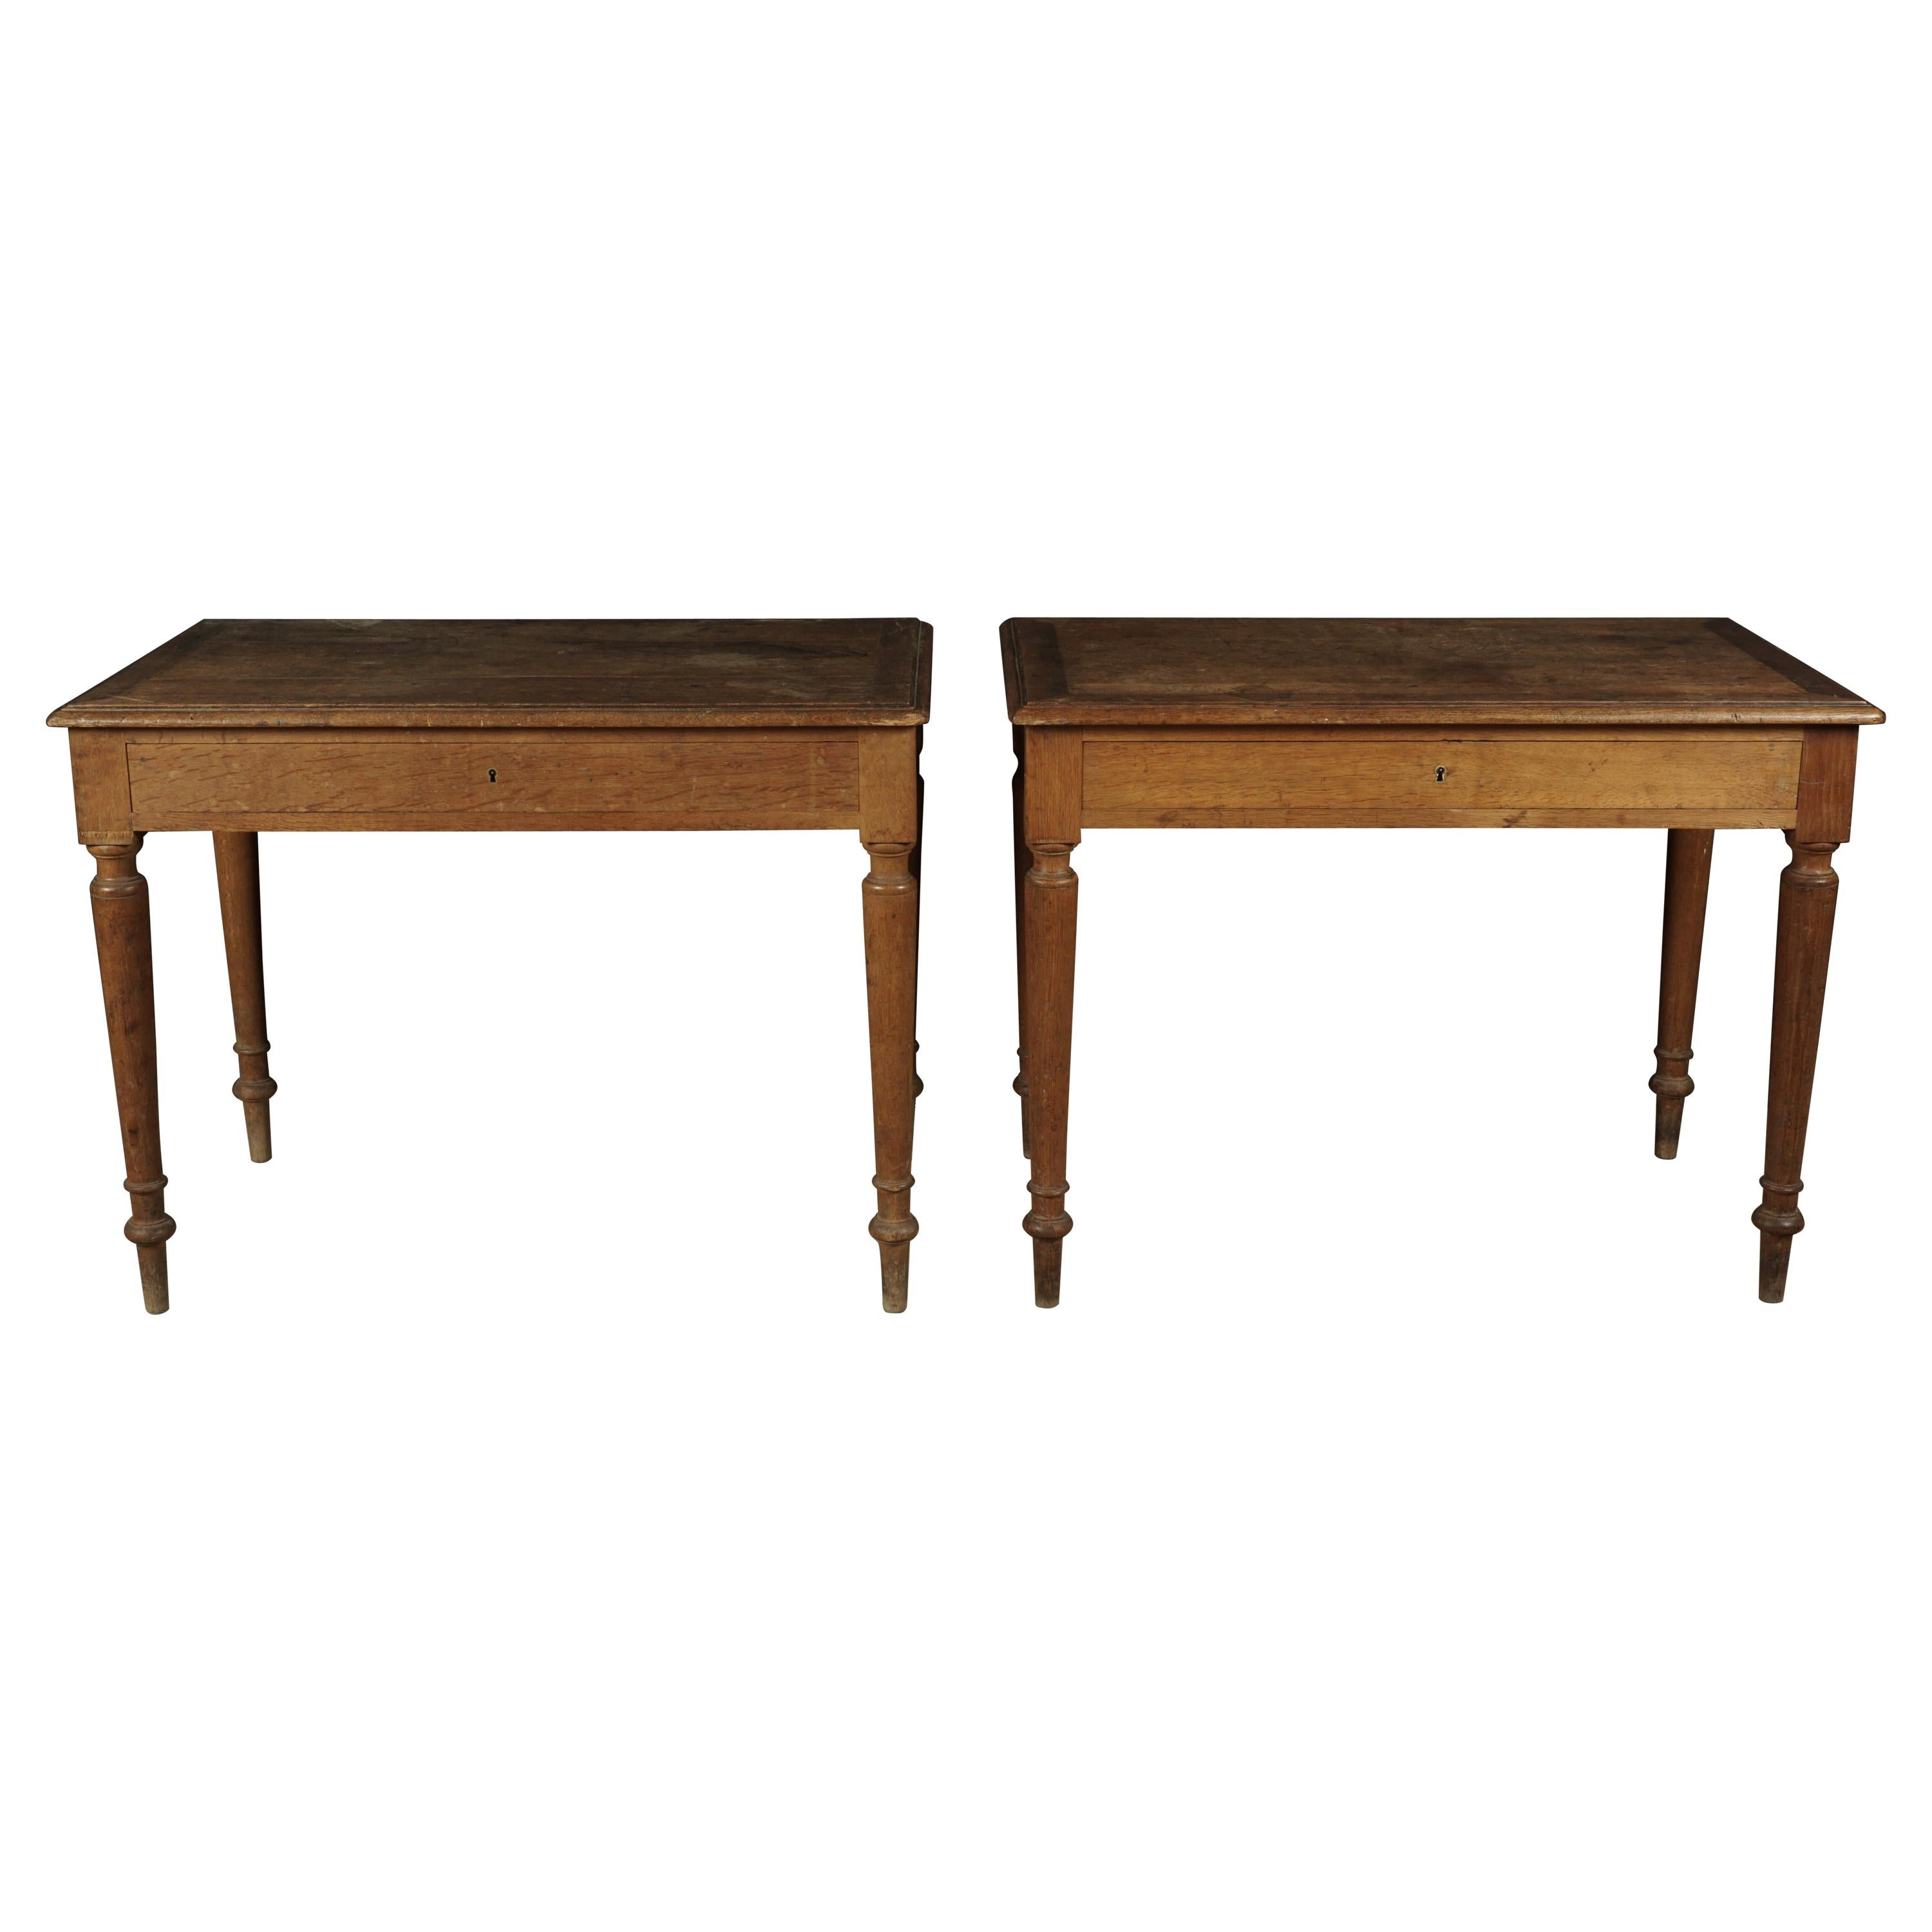 Pair of Oak Bistro Tables from France, circa 1950